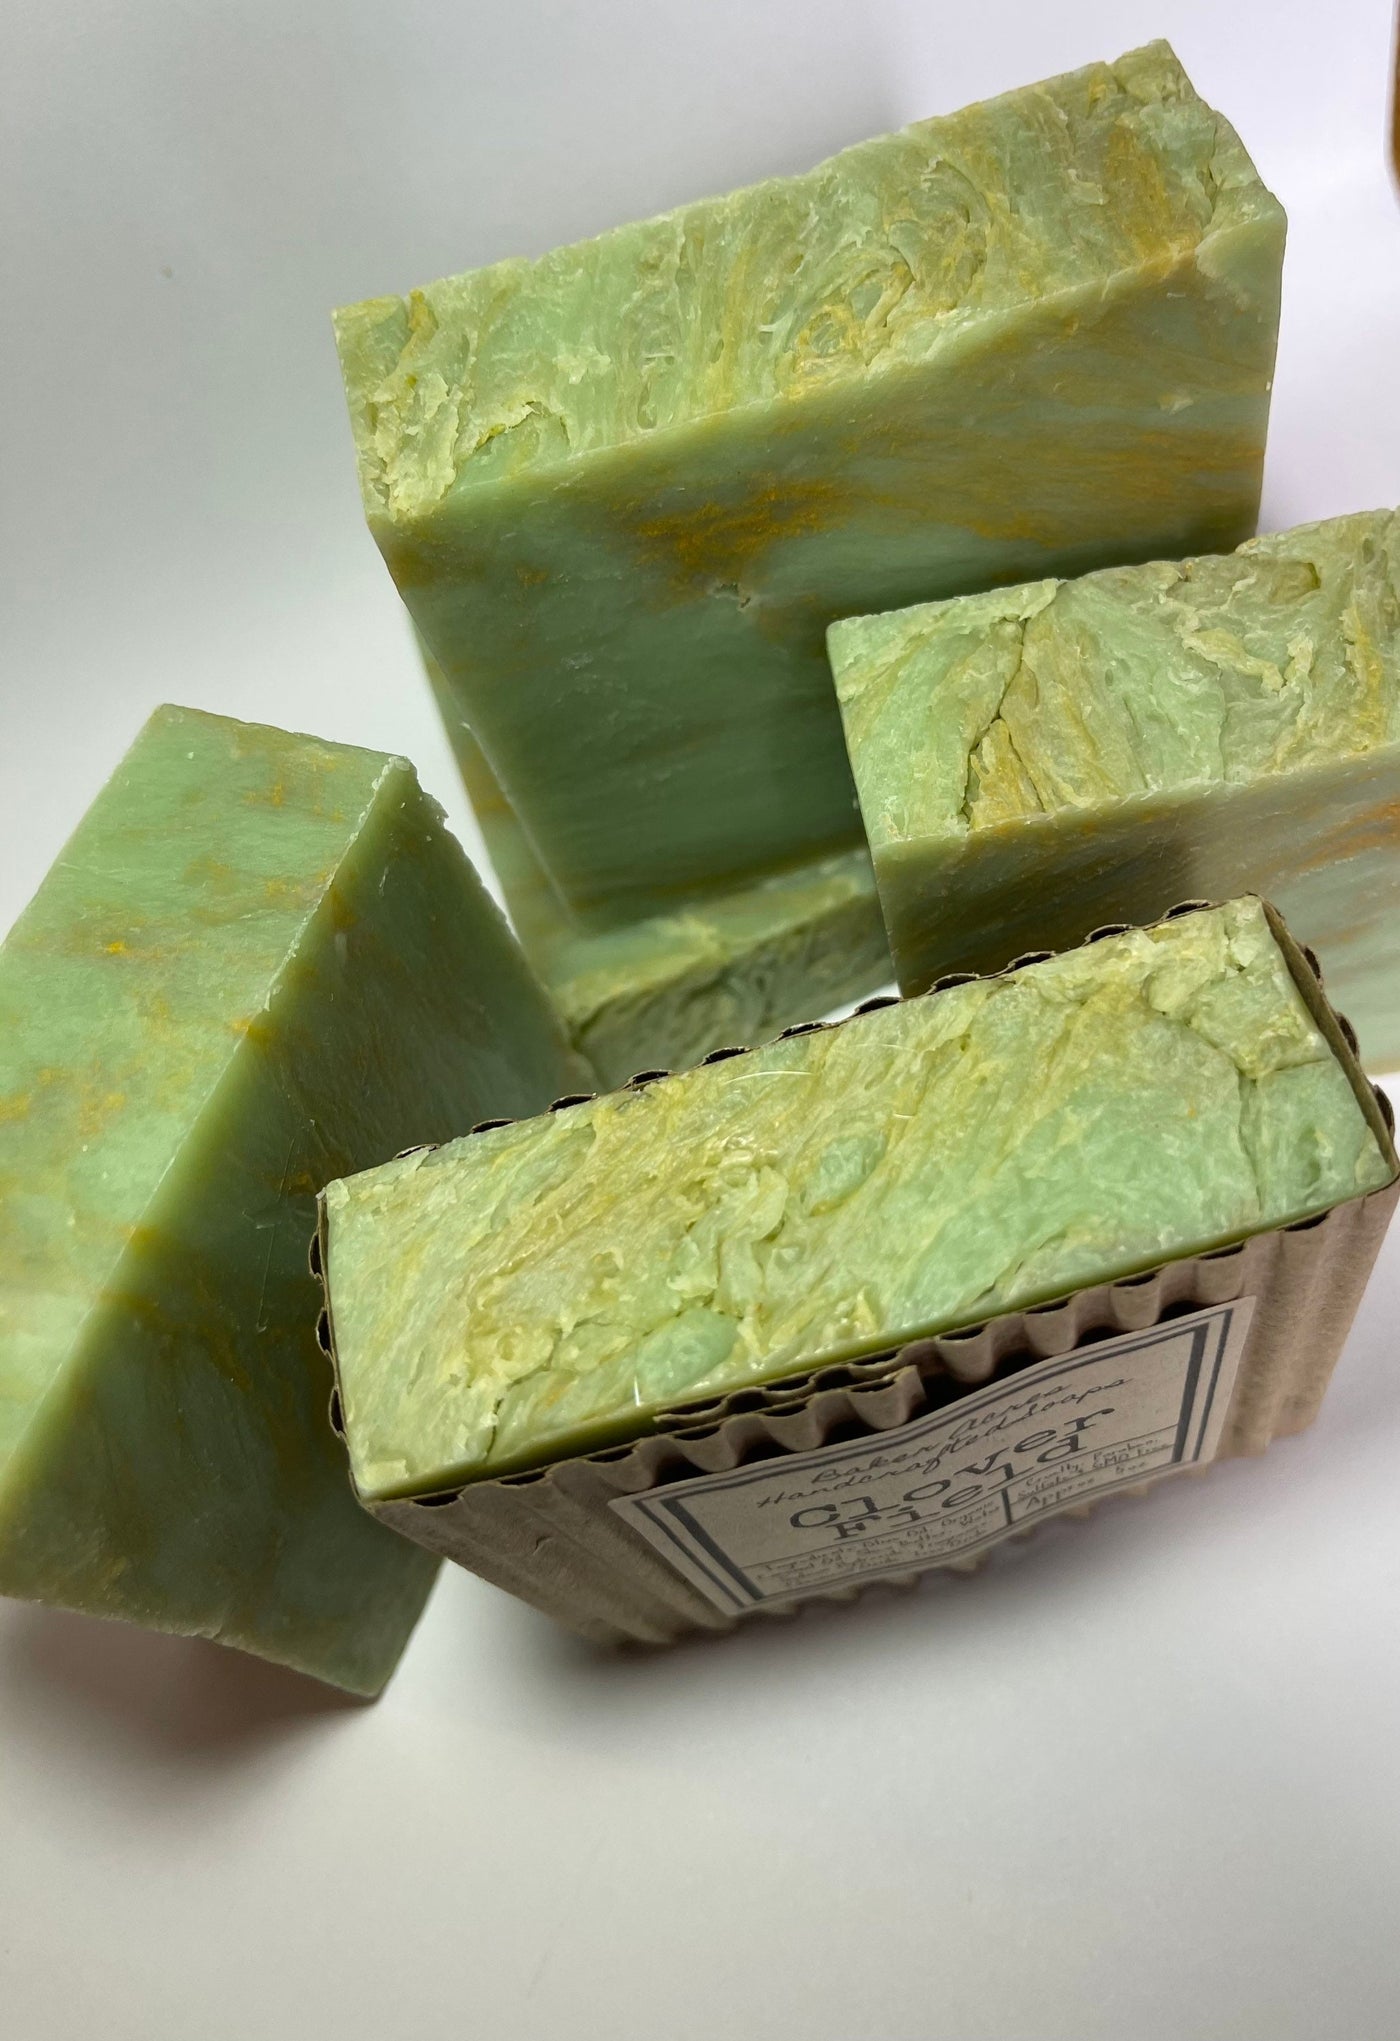 Clover Field Vegan Handcrafted Soap Bar, Large Bath Bar, Natural Shower Cleanser Gift, Refreshing Organic Self Care, Earthy Gift